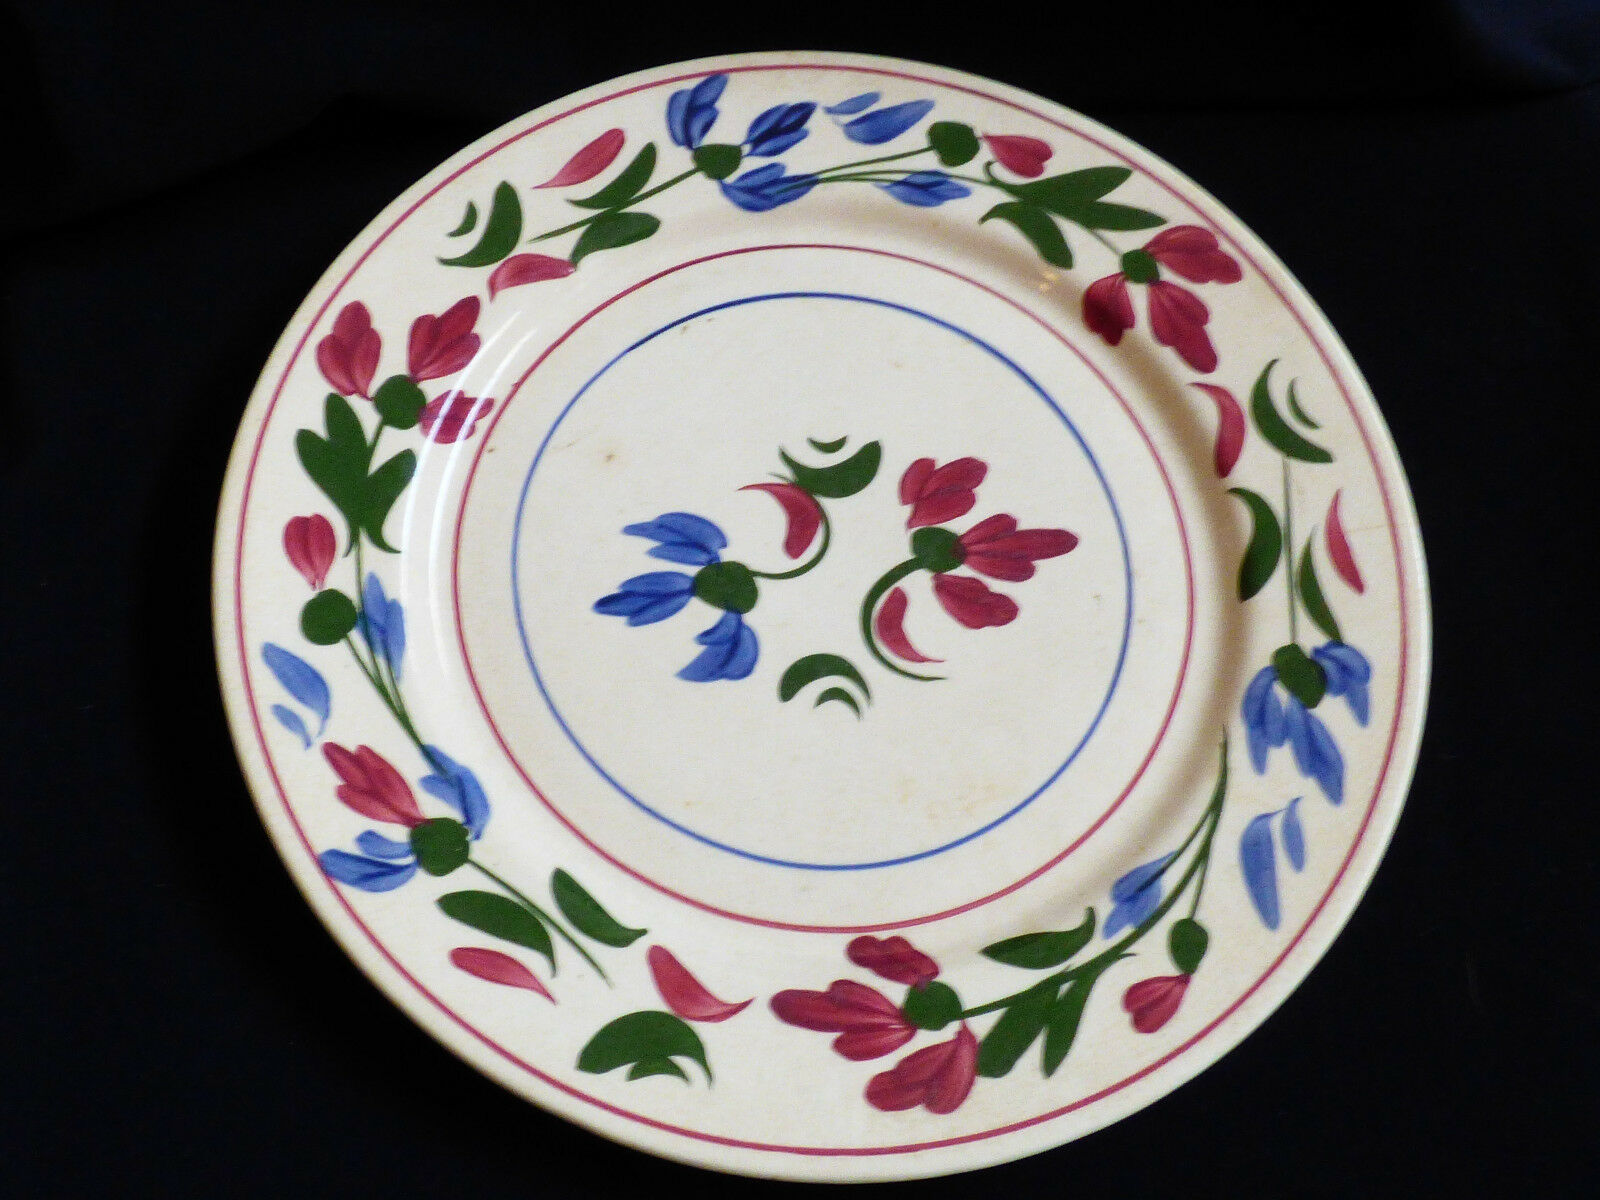 Blue Ridge Southern Potteries10.25" Dinner Plate Floral Pattern